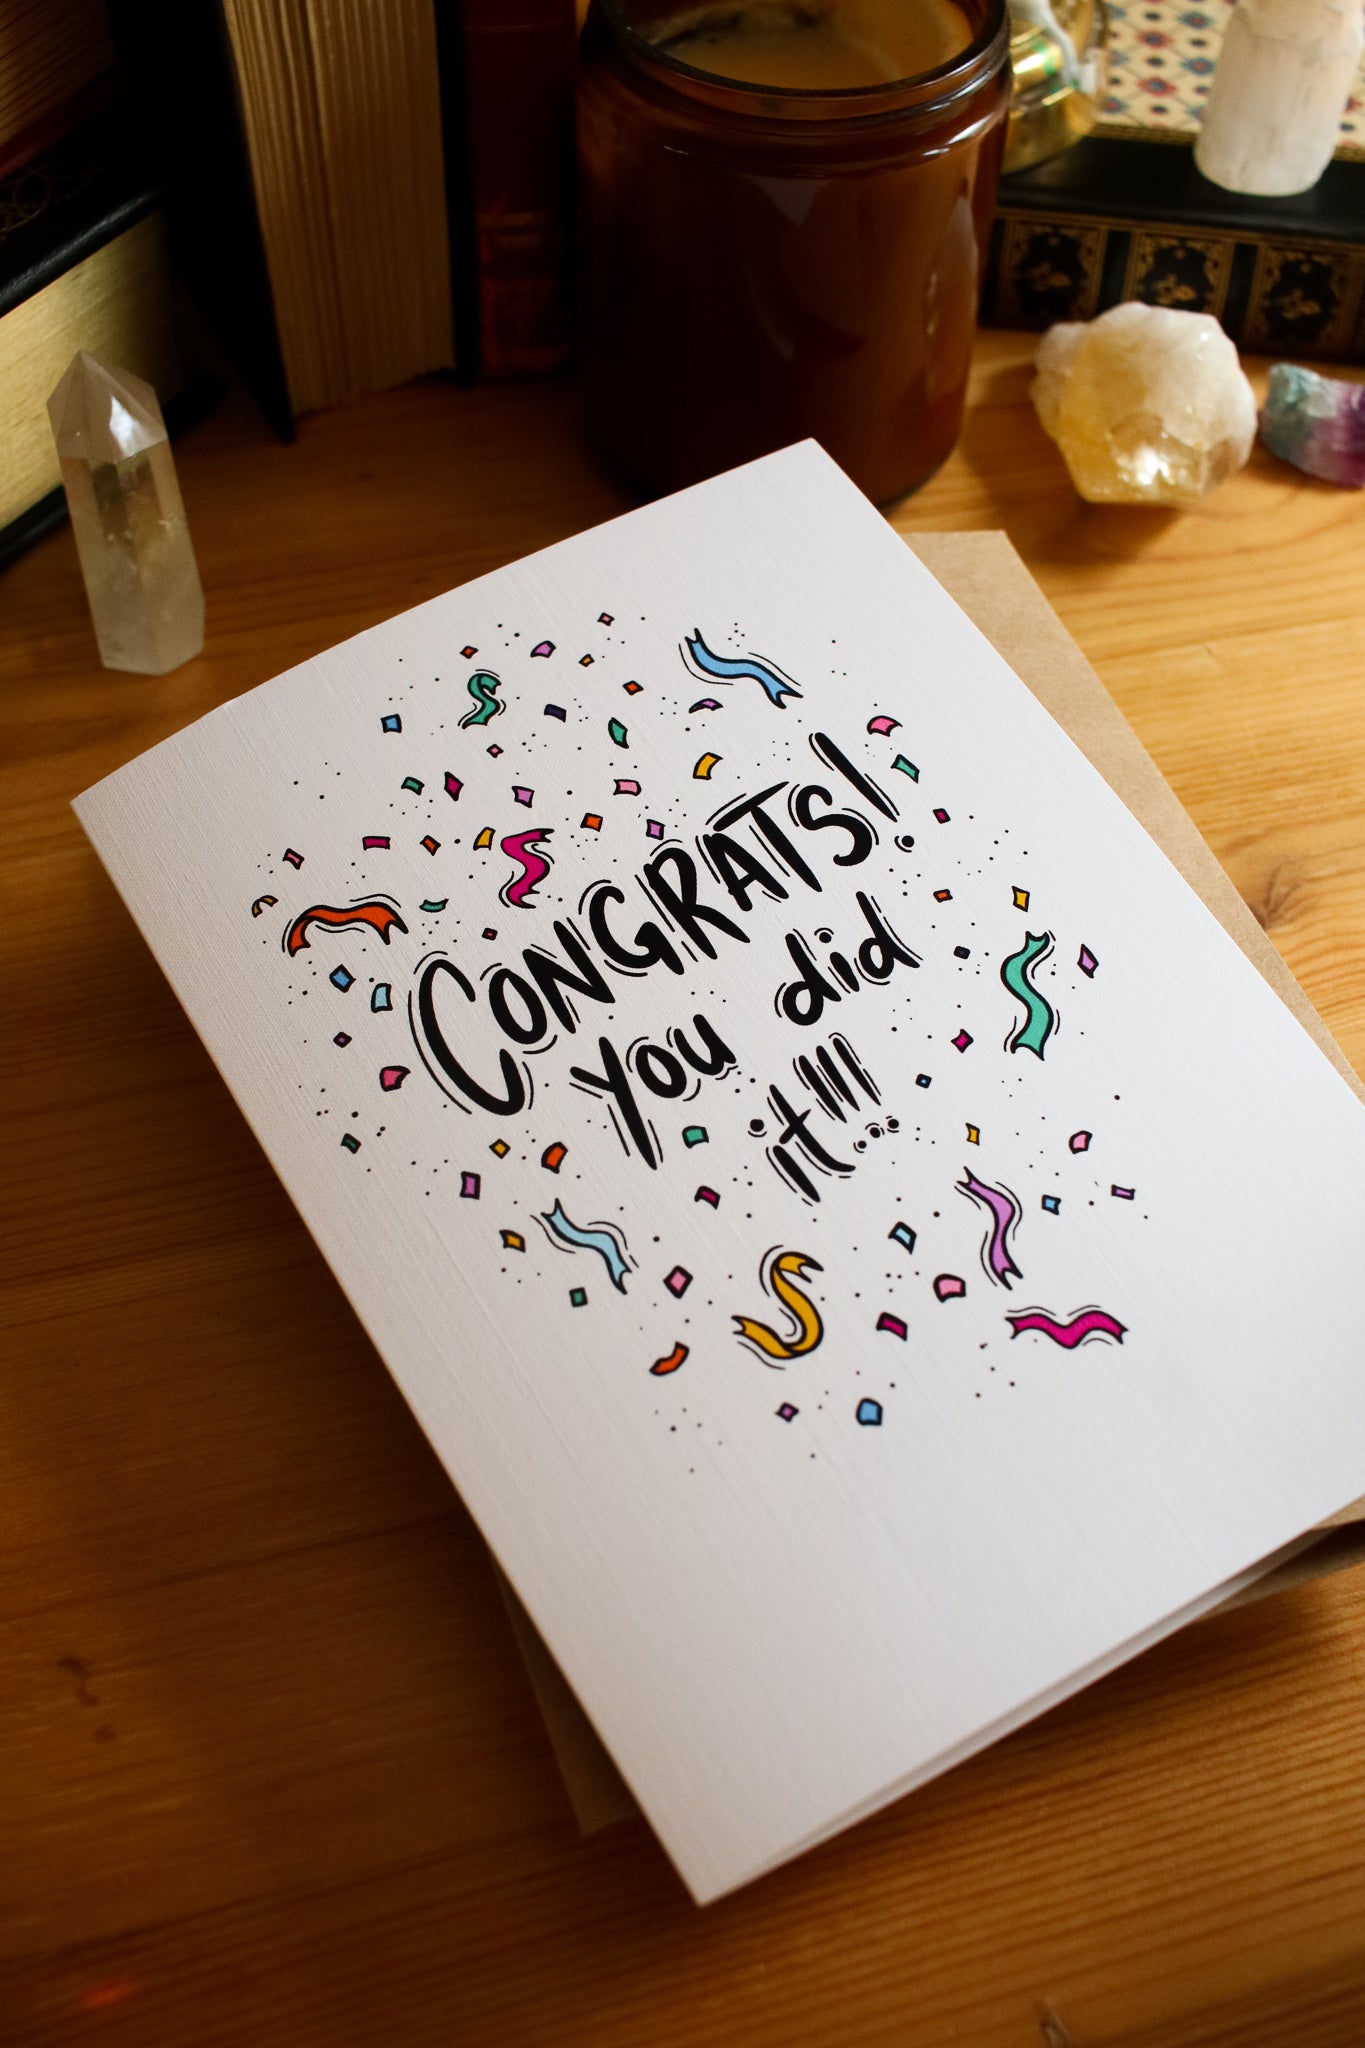 Congrats You Did It! - Greeting Card